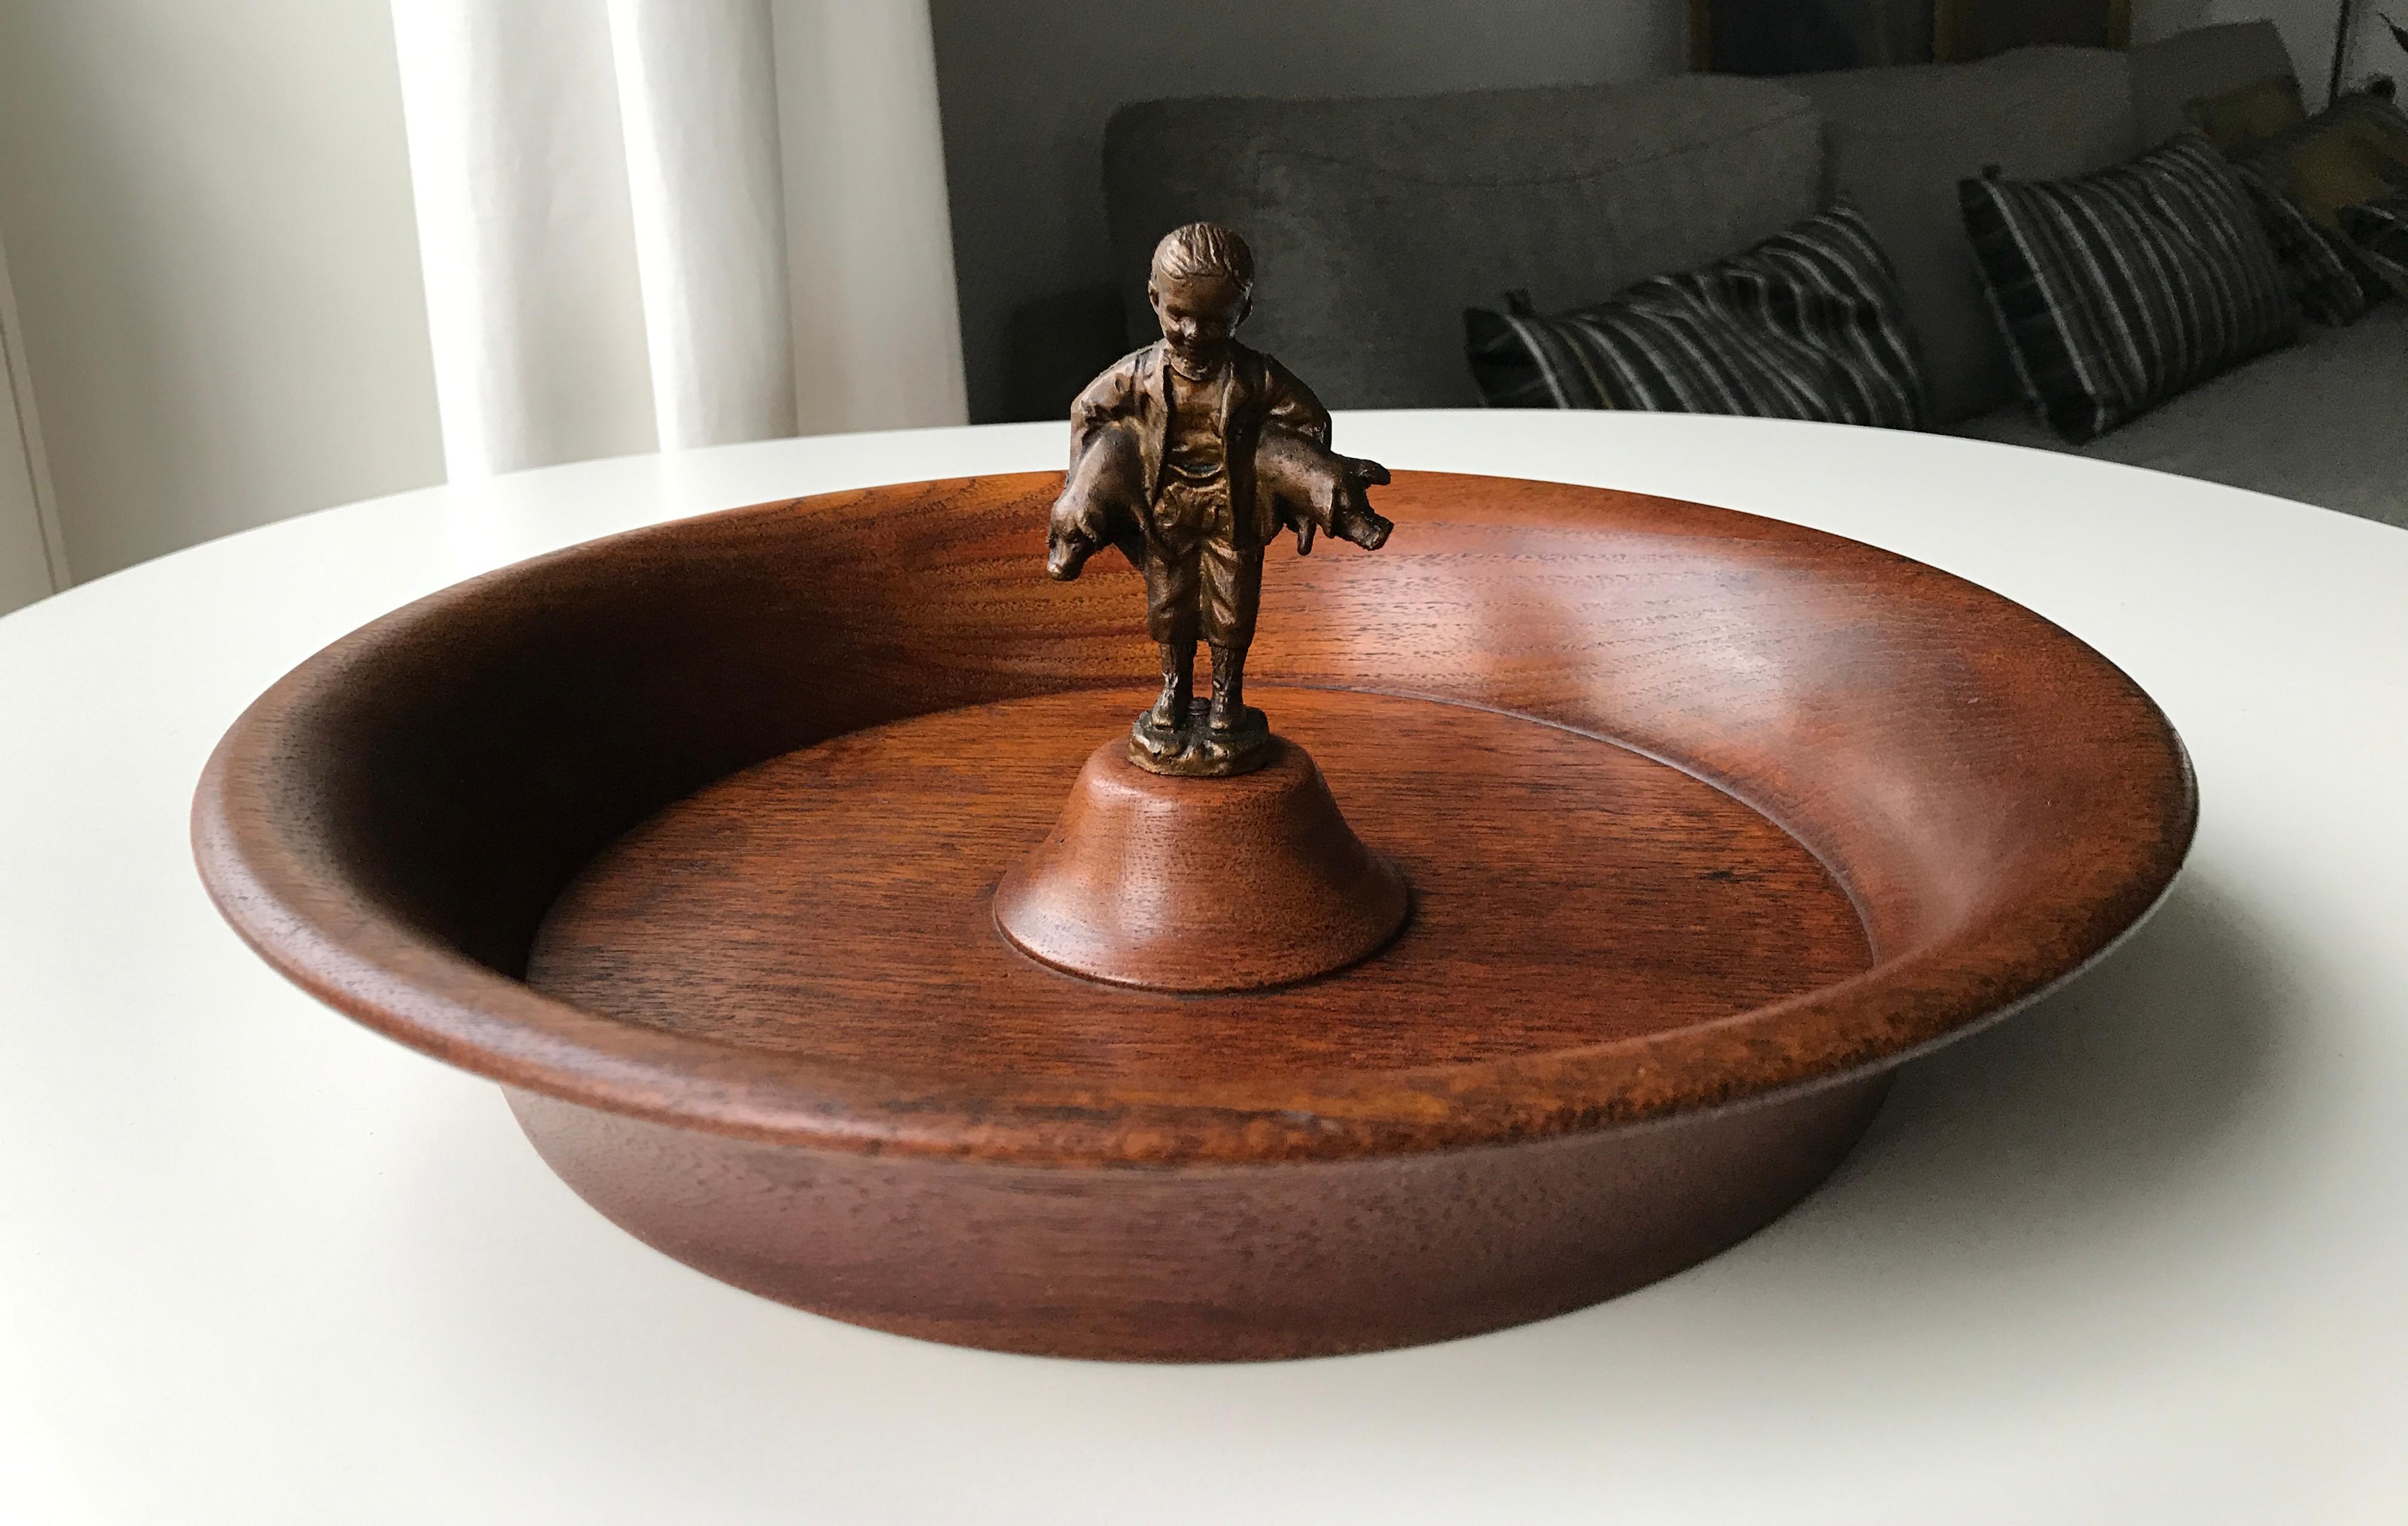 Mid-Century Mid-Century Modern design circular teak bowl with figurine of little boy holding two small piglets in his arms in metal presumably brass or bronze. Very lively in expression. The bowl is in solid teak wood in very good condition. No